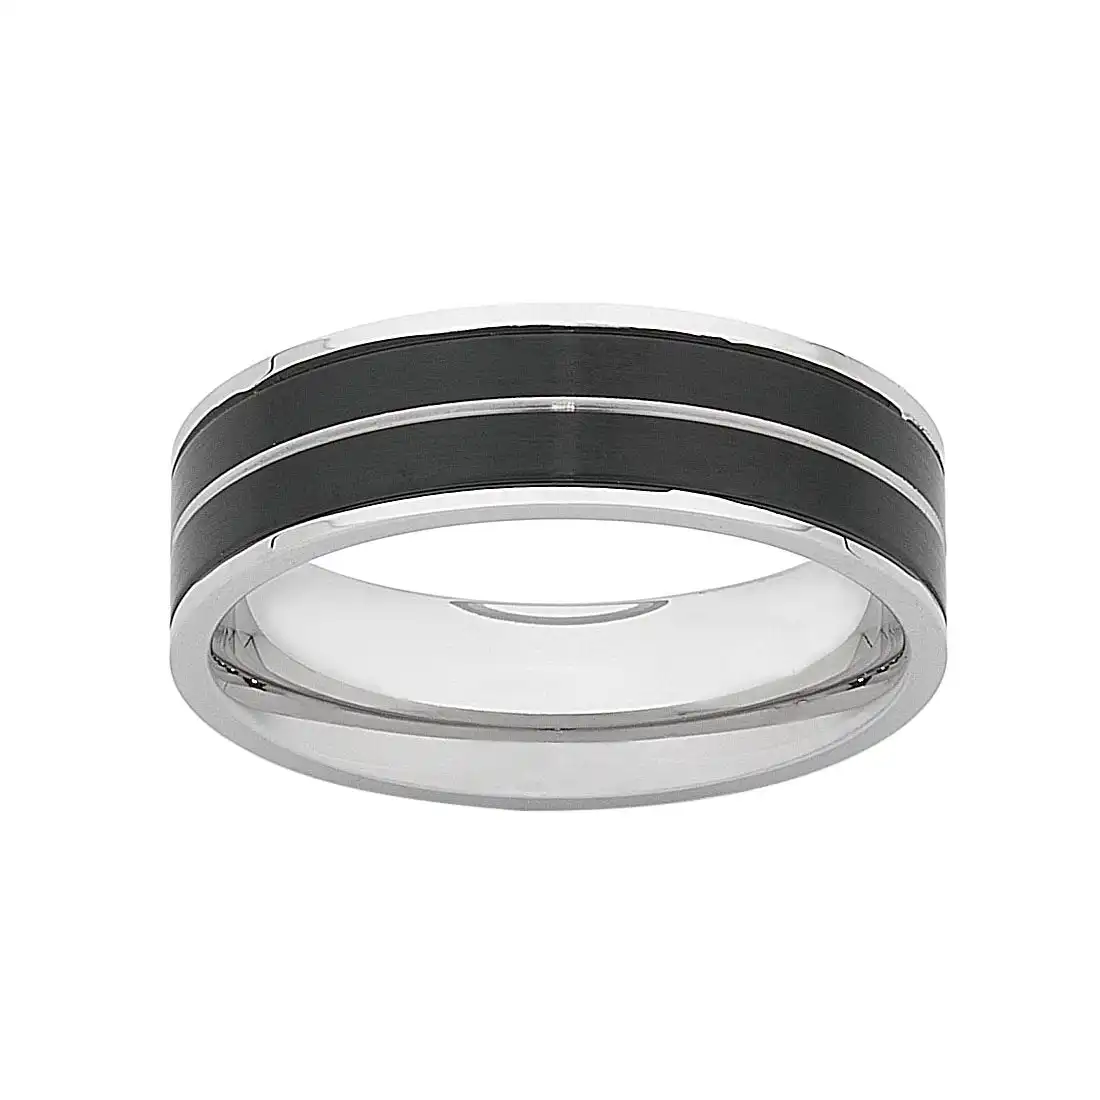 Stainless Steel Men's Ring with Black Plated Sides